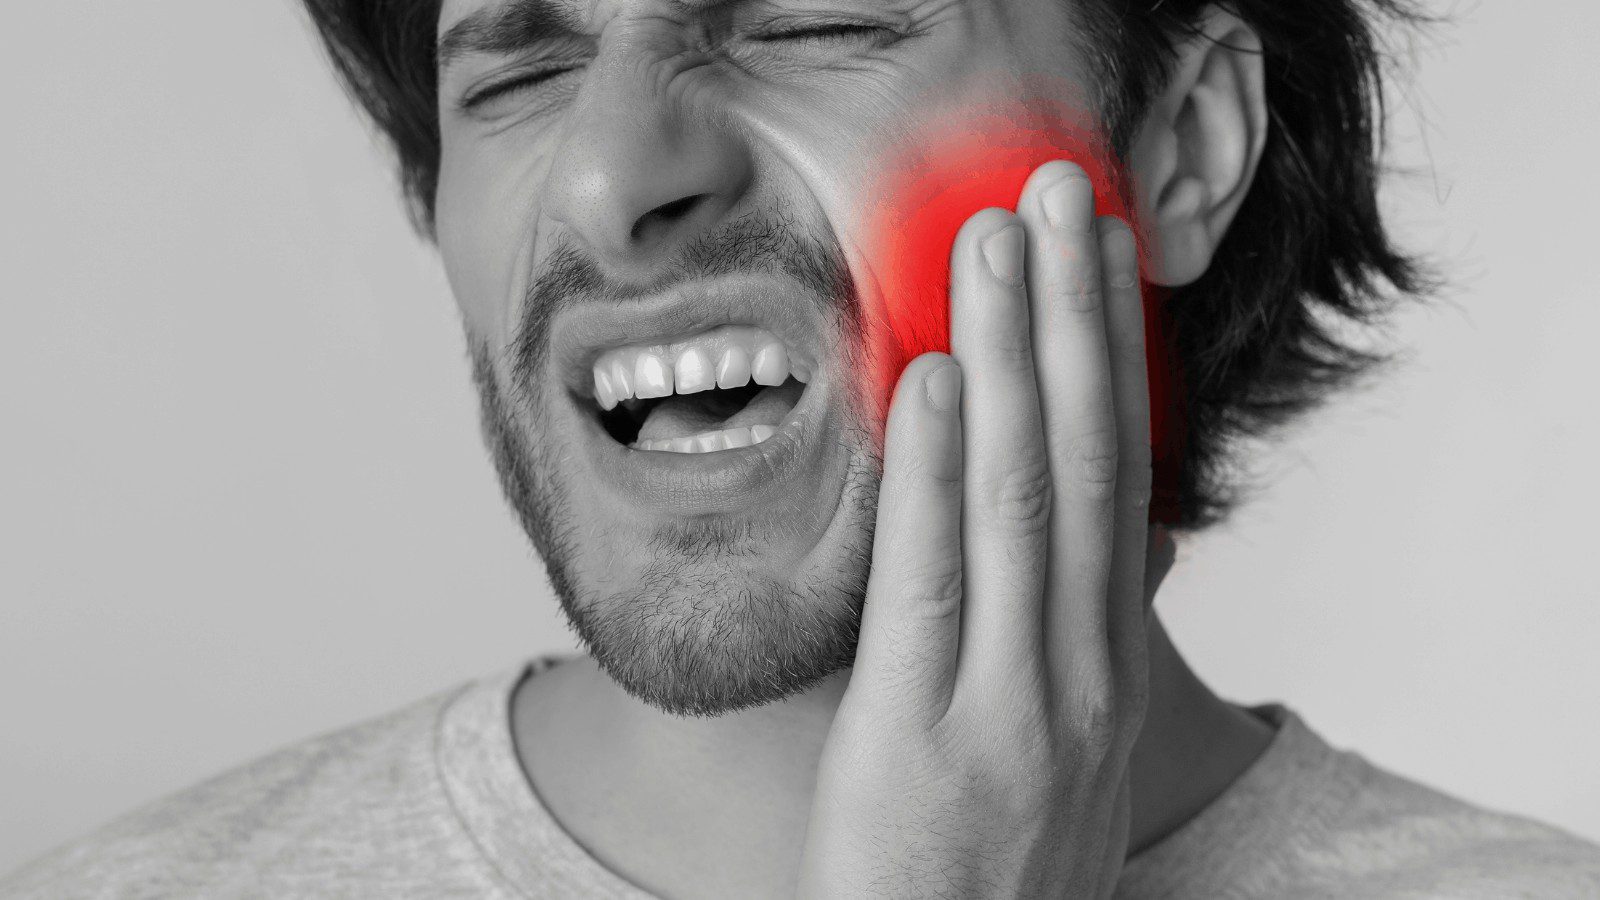 Maryland Scientists Discover Why Cold Foods Can Cause Tooth Pain